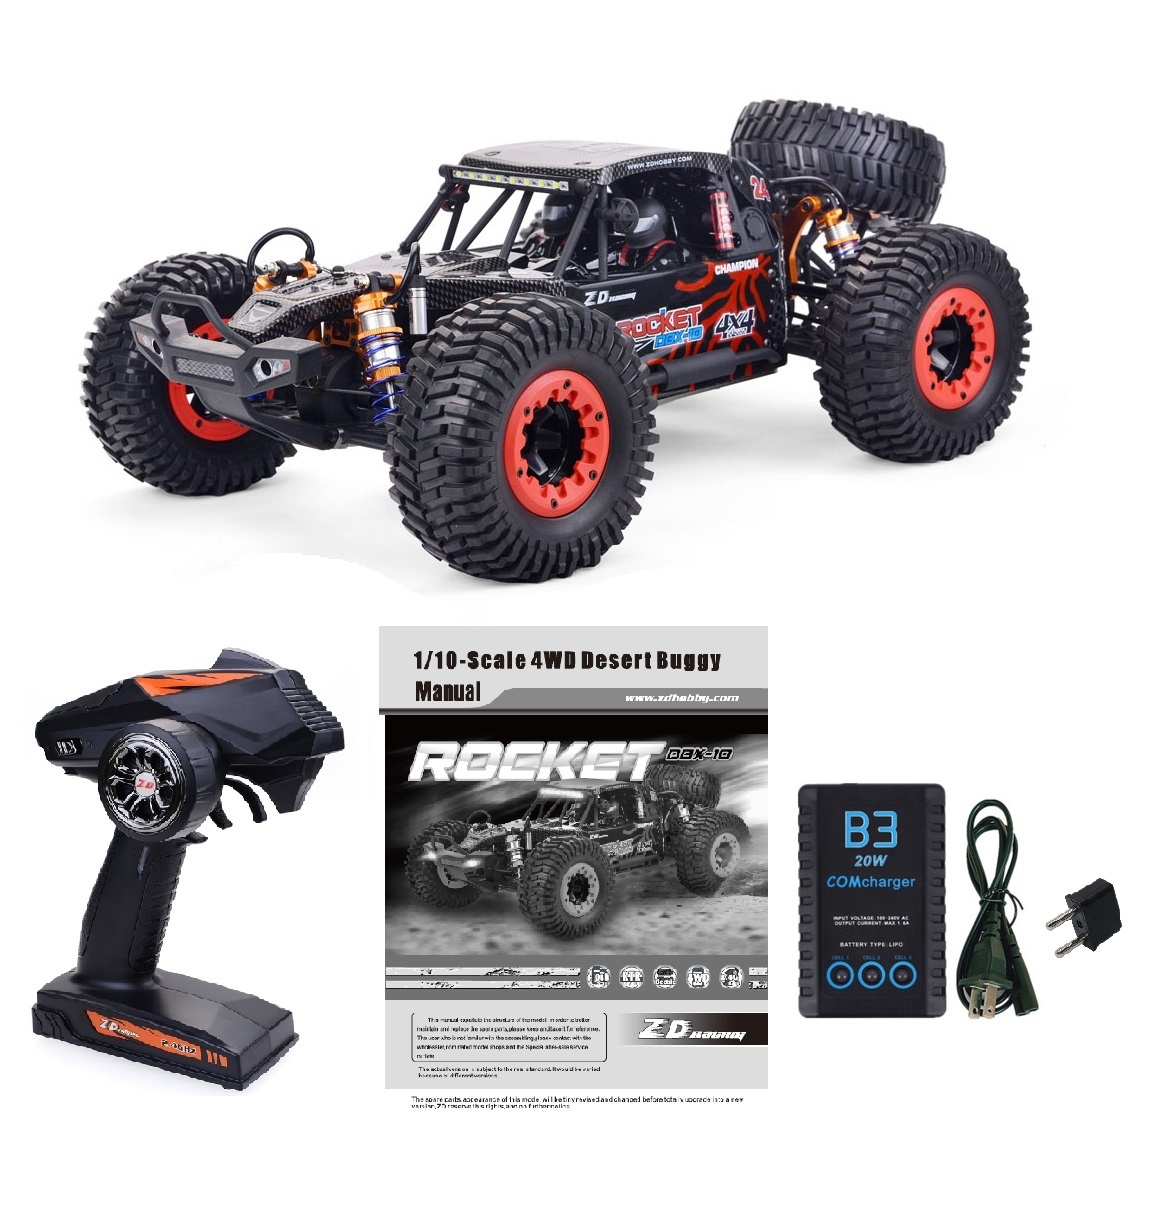 ZD Racing DBX-10 1/10 Scale 4WD Brushless Electric Desert buggy